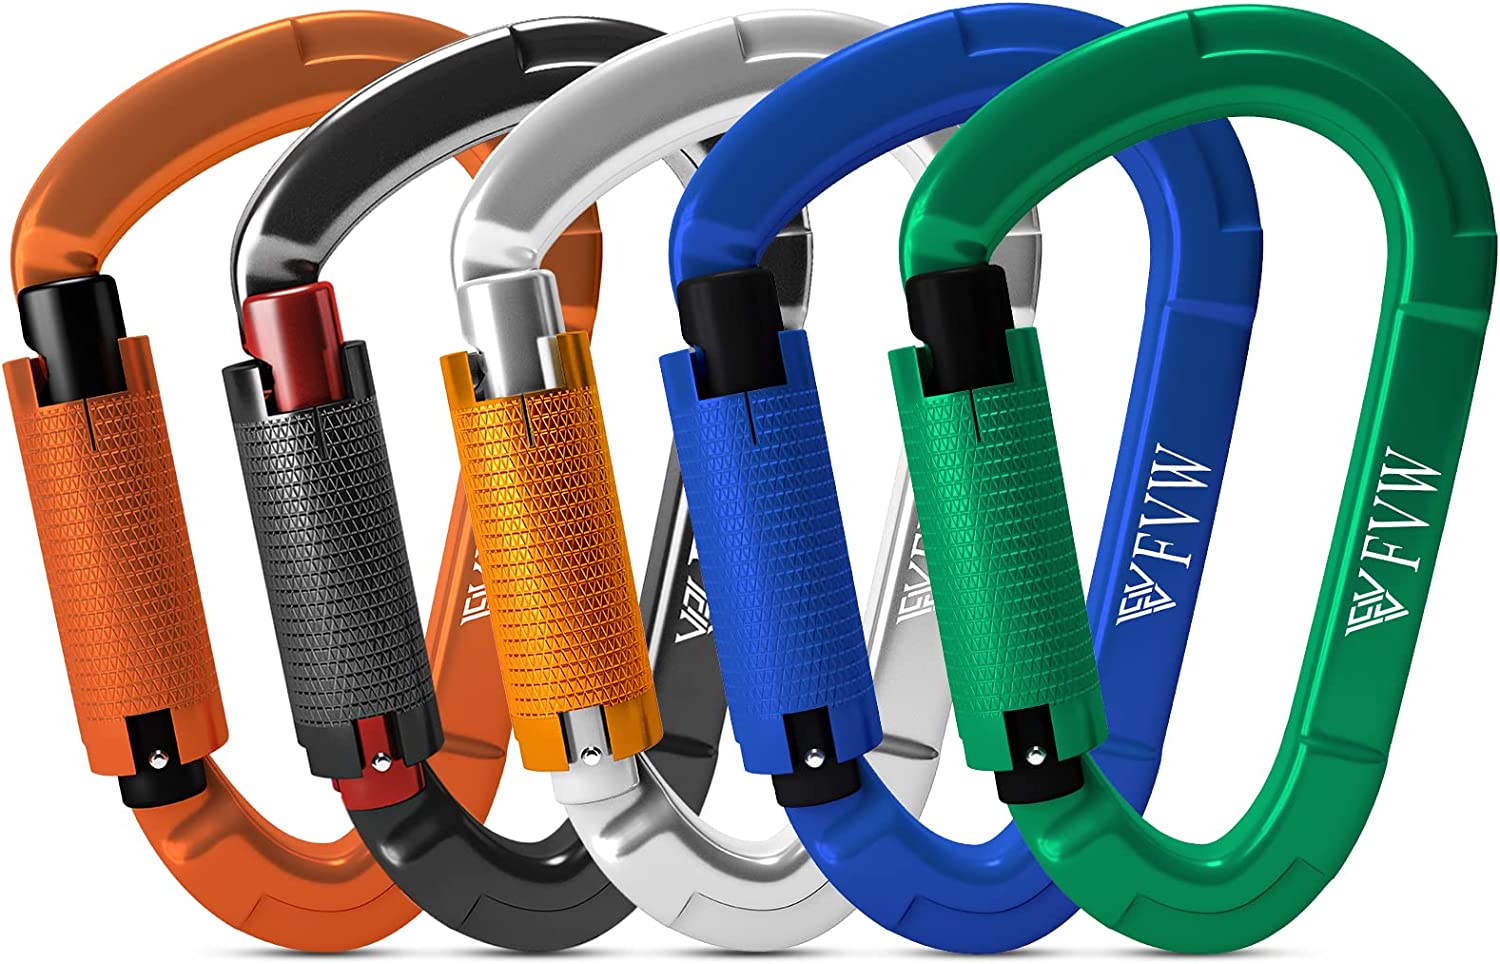 FVW Auto Locking Rock Climbing Carabiner Clips,Professional 25KN (5620 lbs) Heavy Duty Caribeaners for Rappelling Swing Rescue & Gym etc, Large D-Shaped Carabiners